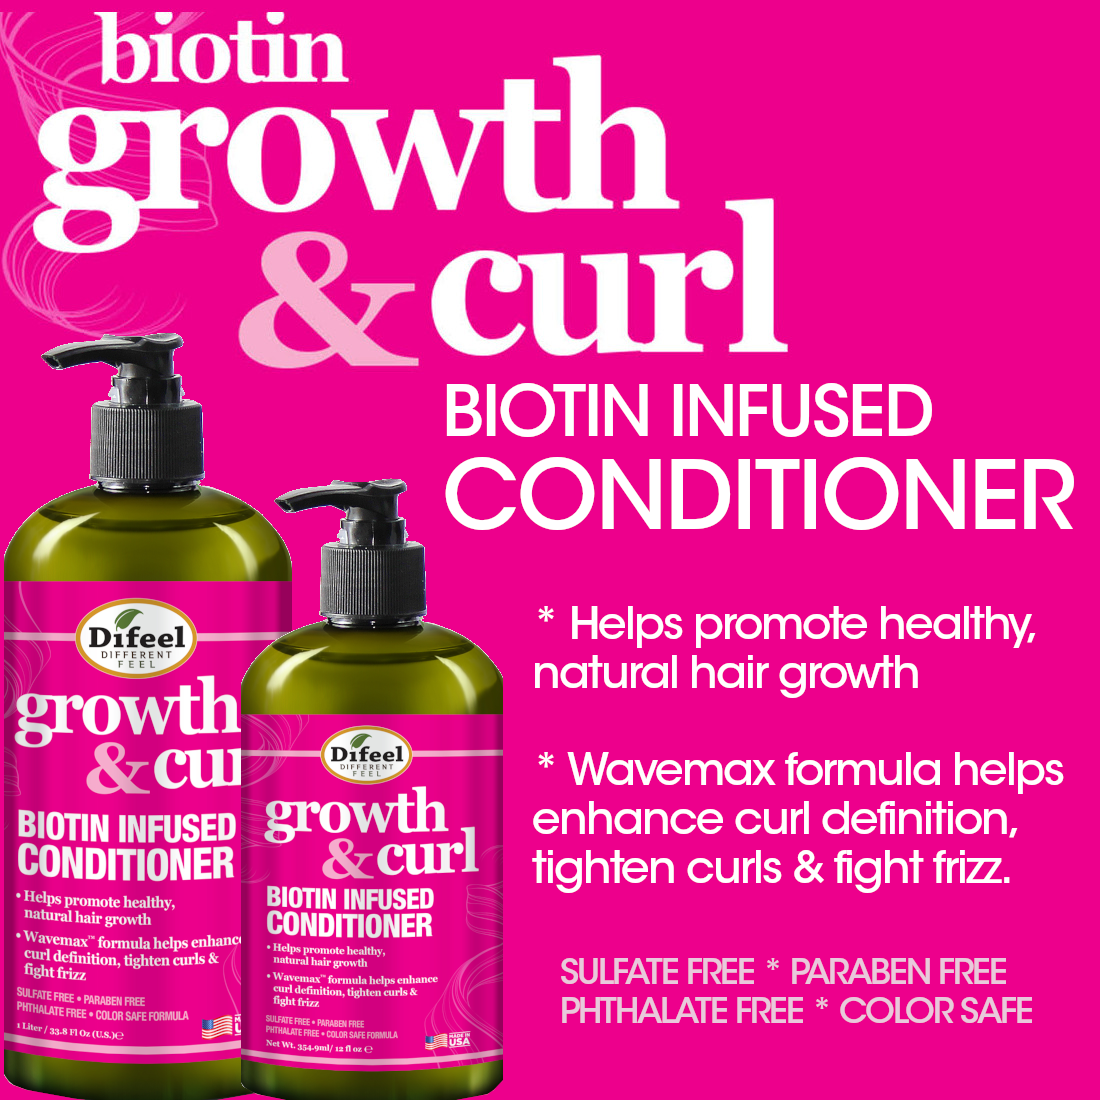 Difeel Growth and Curl Biotin Shampoo 12 oz.  and Conditioner 12 oz. 2-PC Gift Box